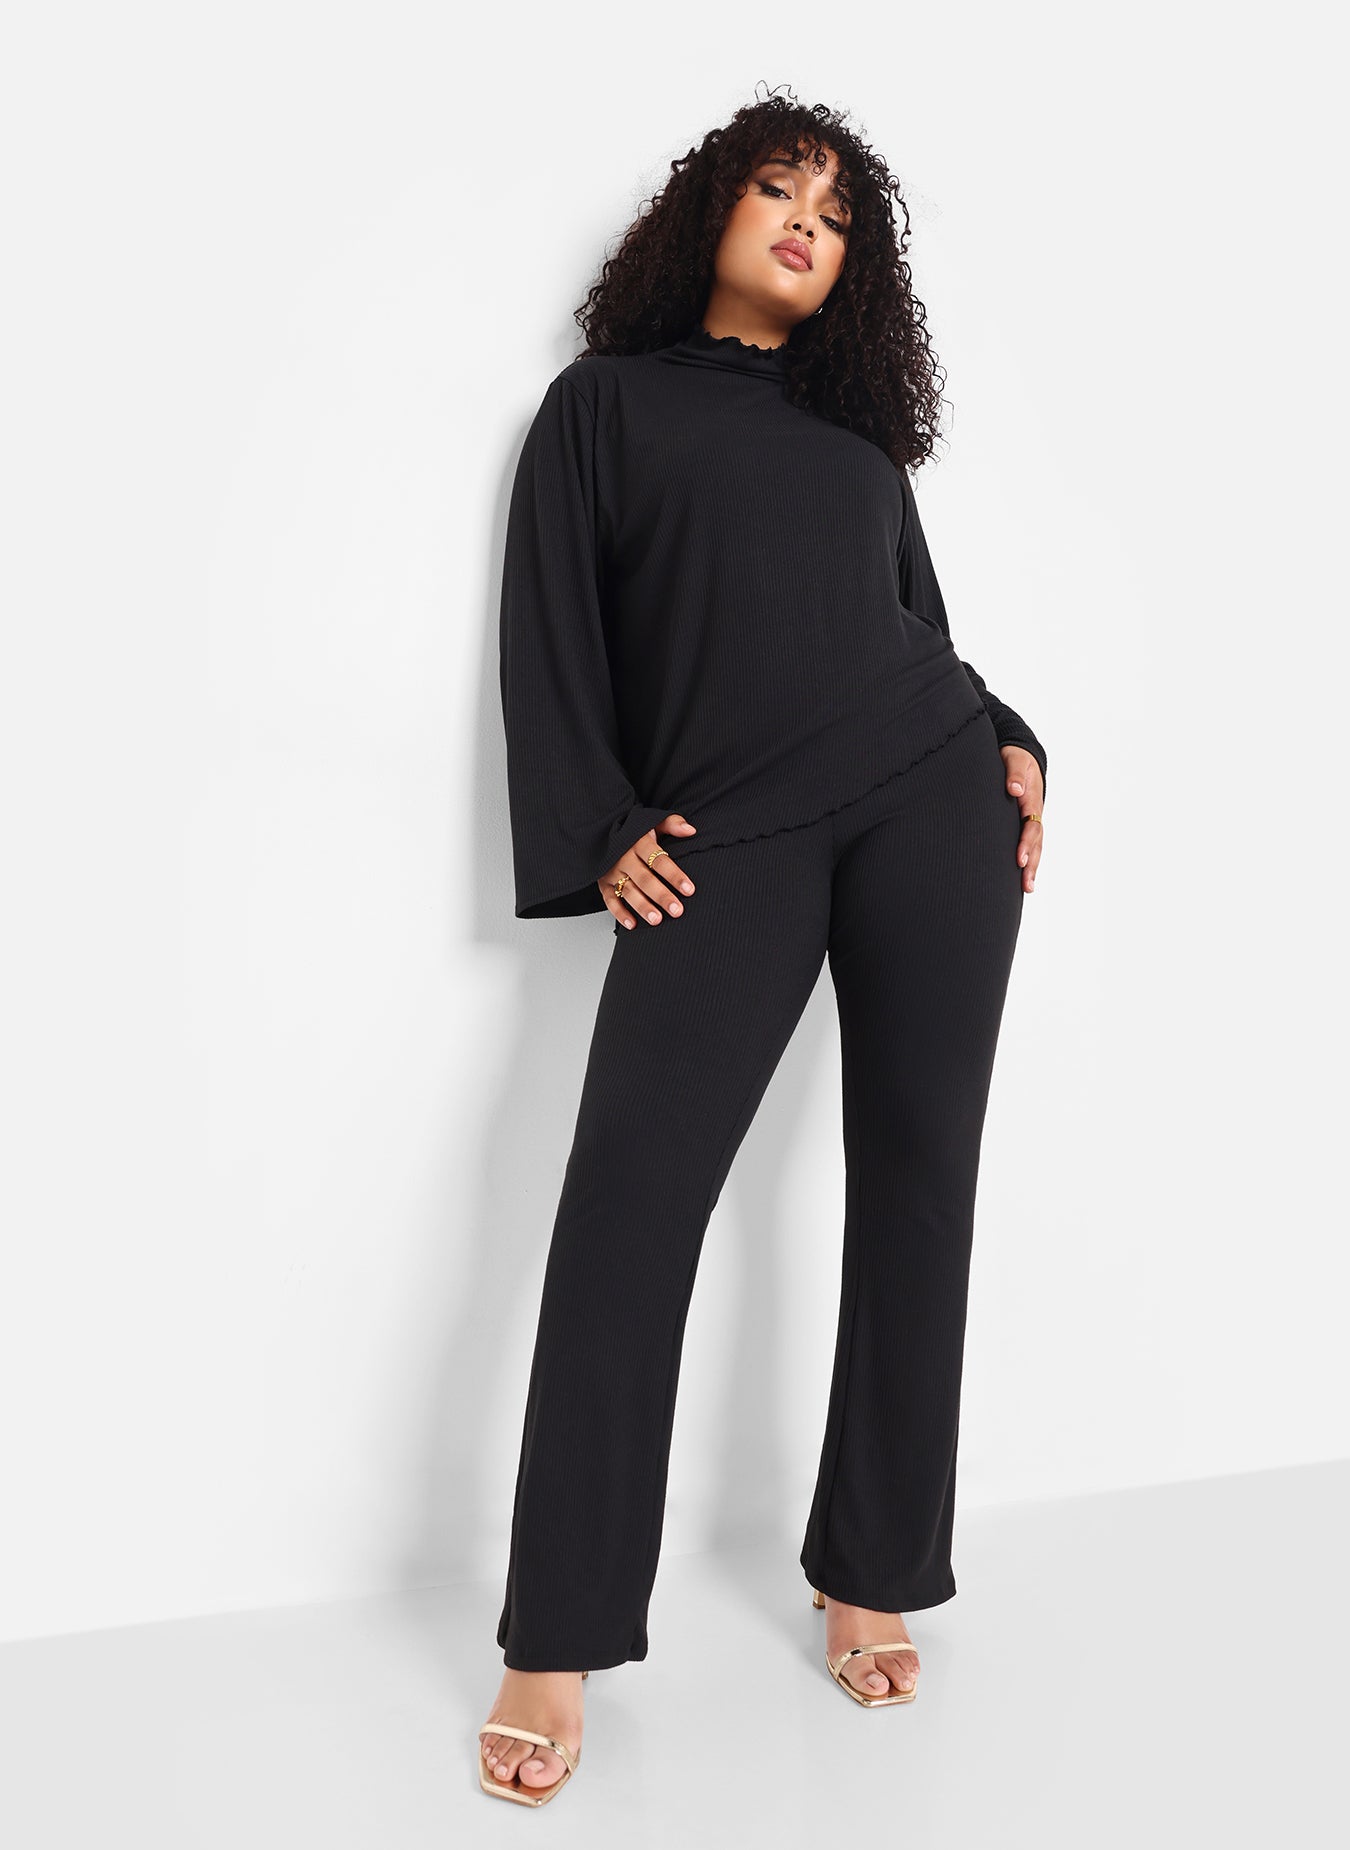 Buy theRebelinme Plus Size Womens Charcoal Grey Solid Color Ribbed Top &  Capri Set (Set of 2) online